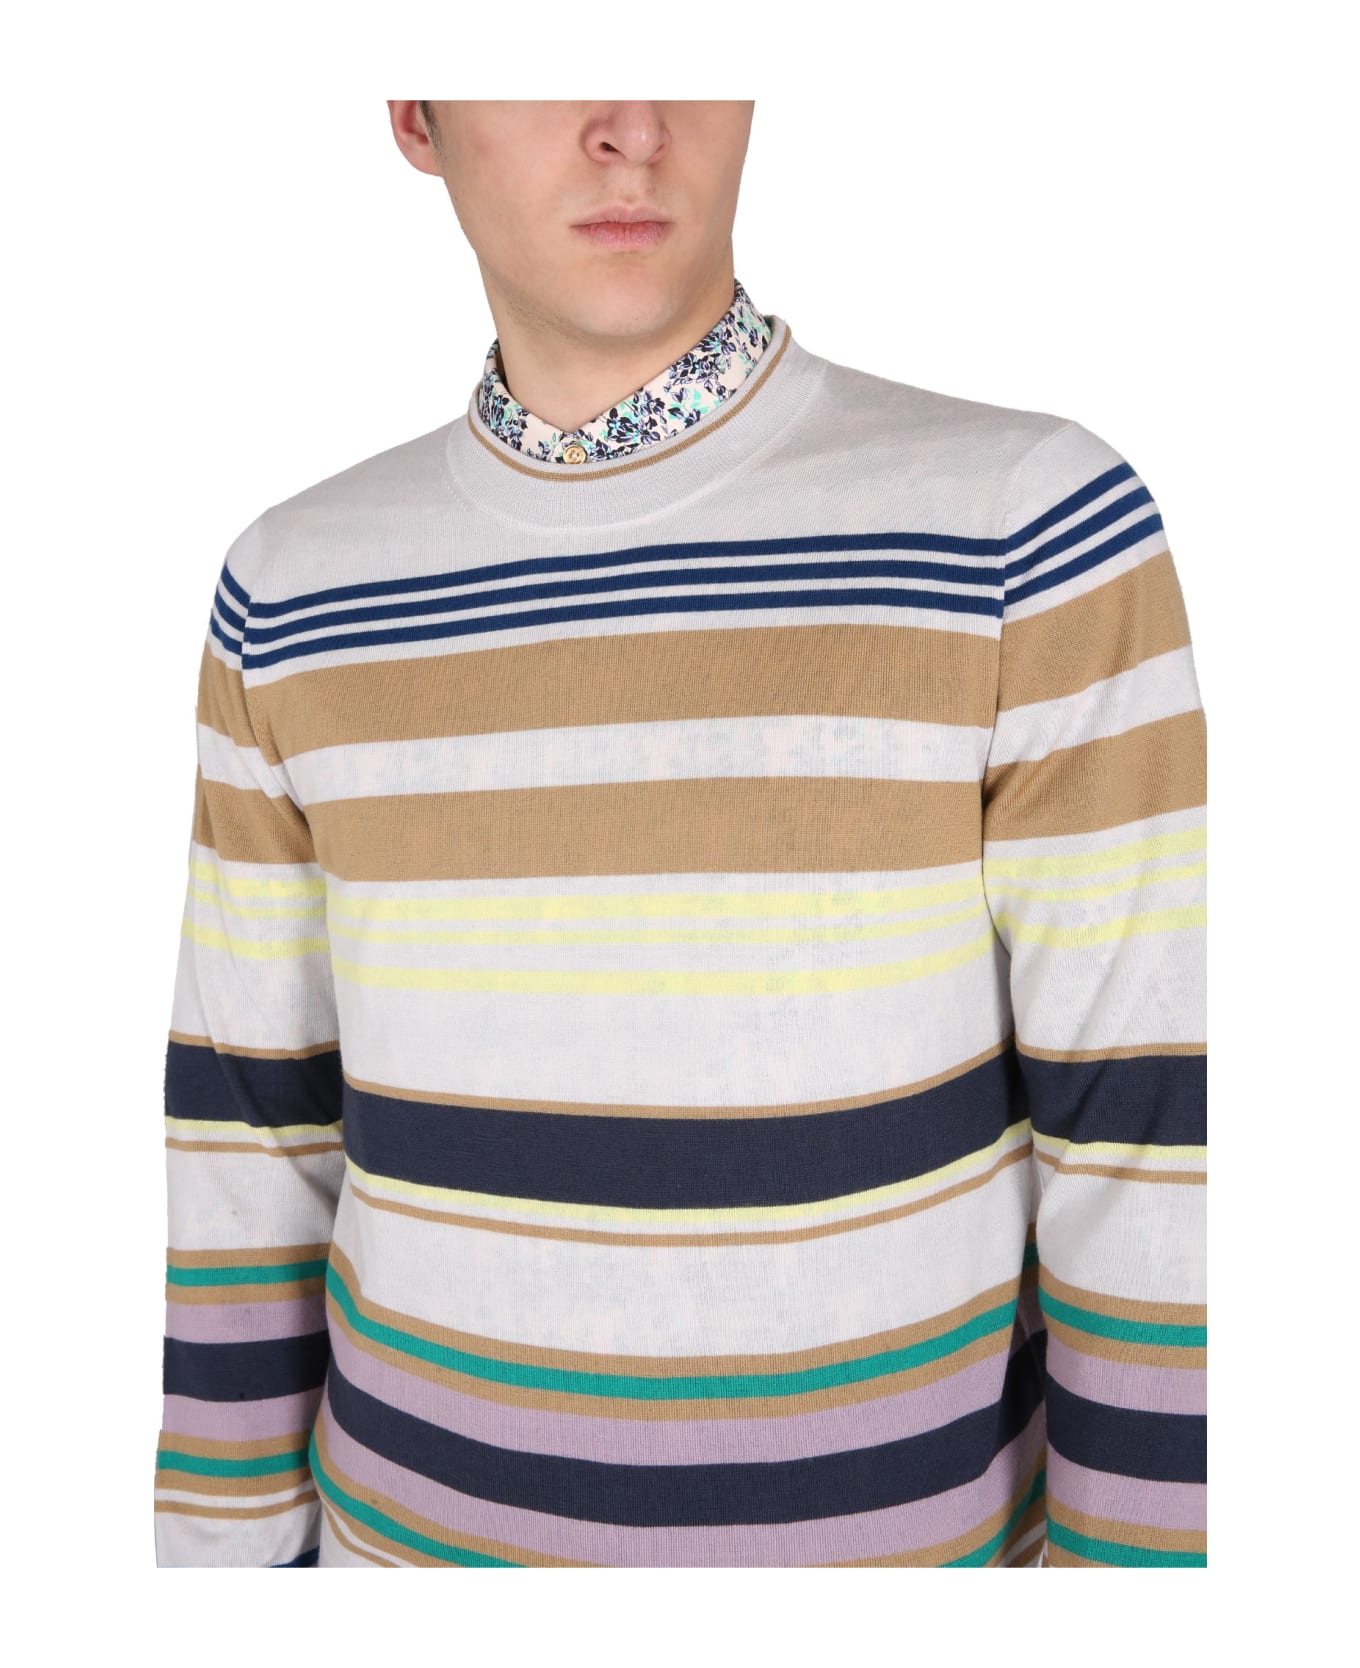 Paul Smith Jersey With Stripe Pattern - MULTICOLOR